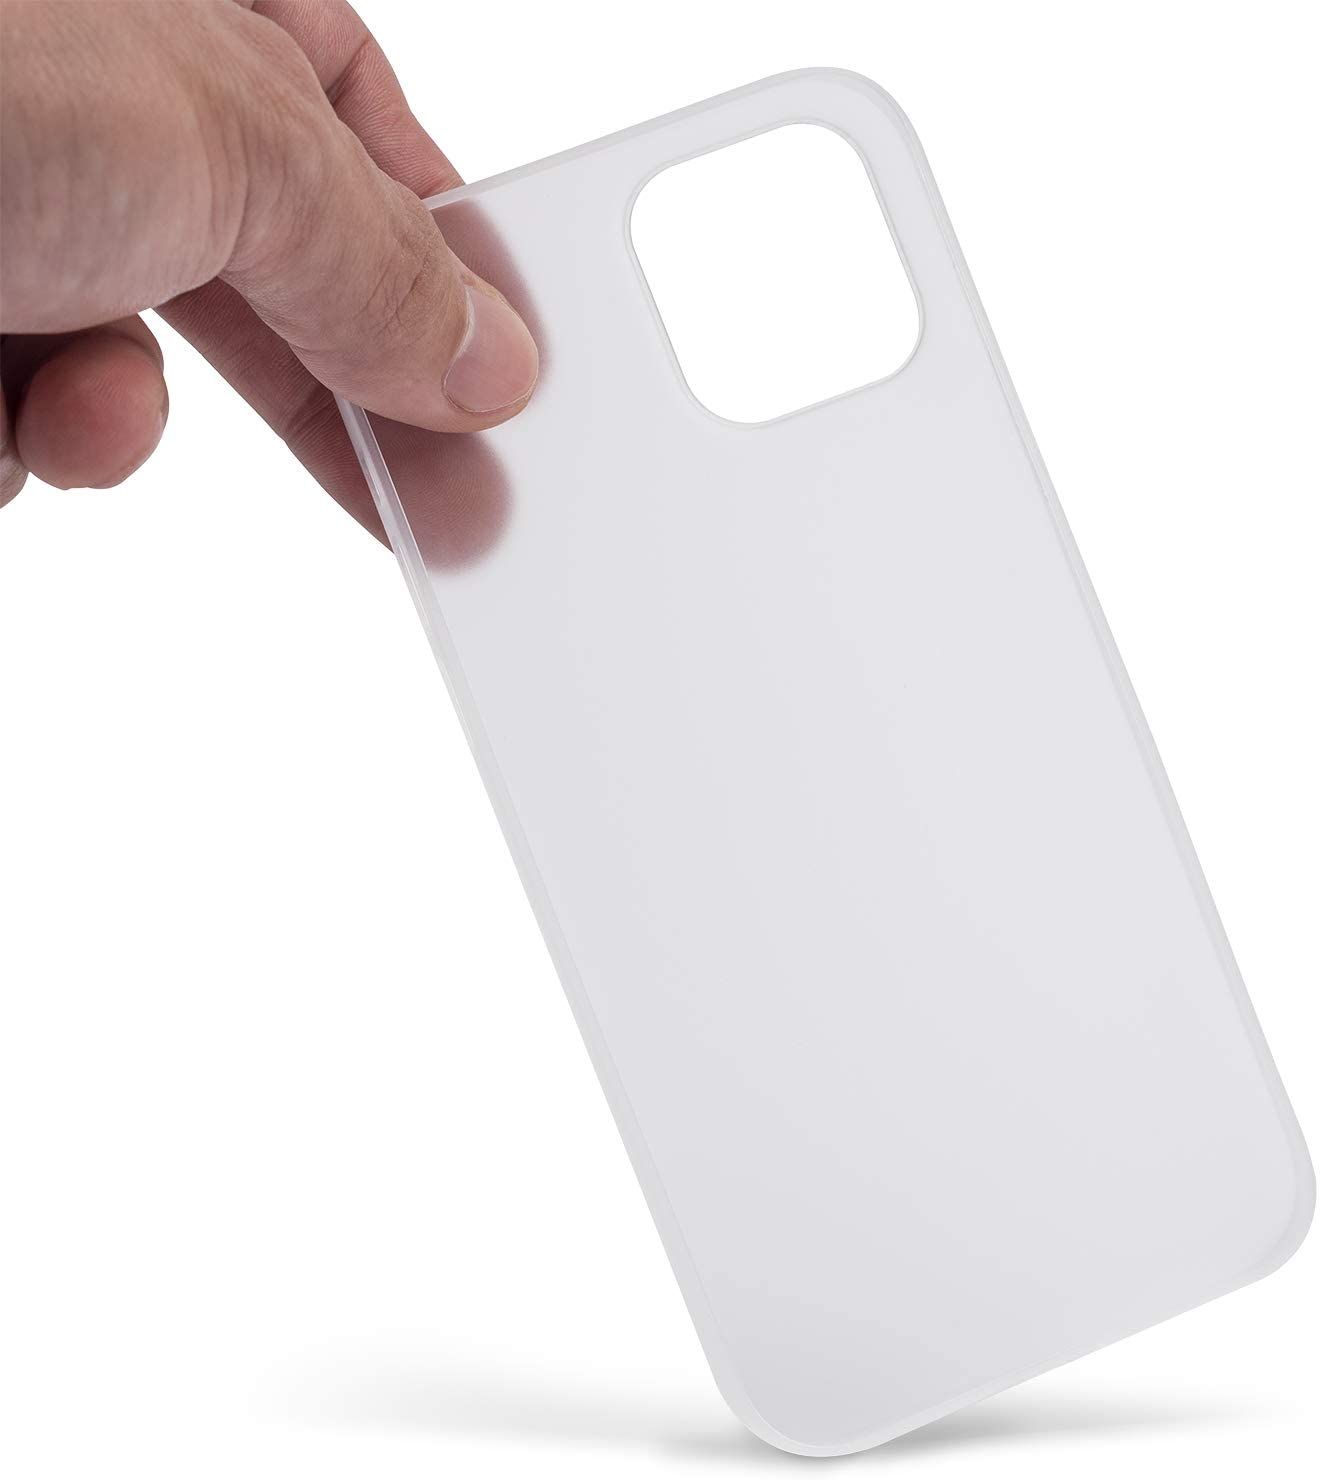 totallee iPhone 12 Pro Max Case b